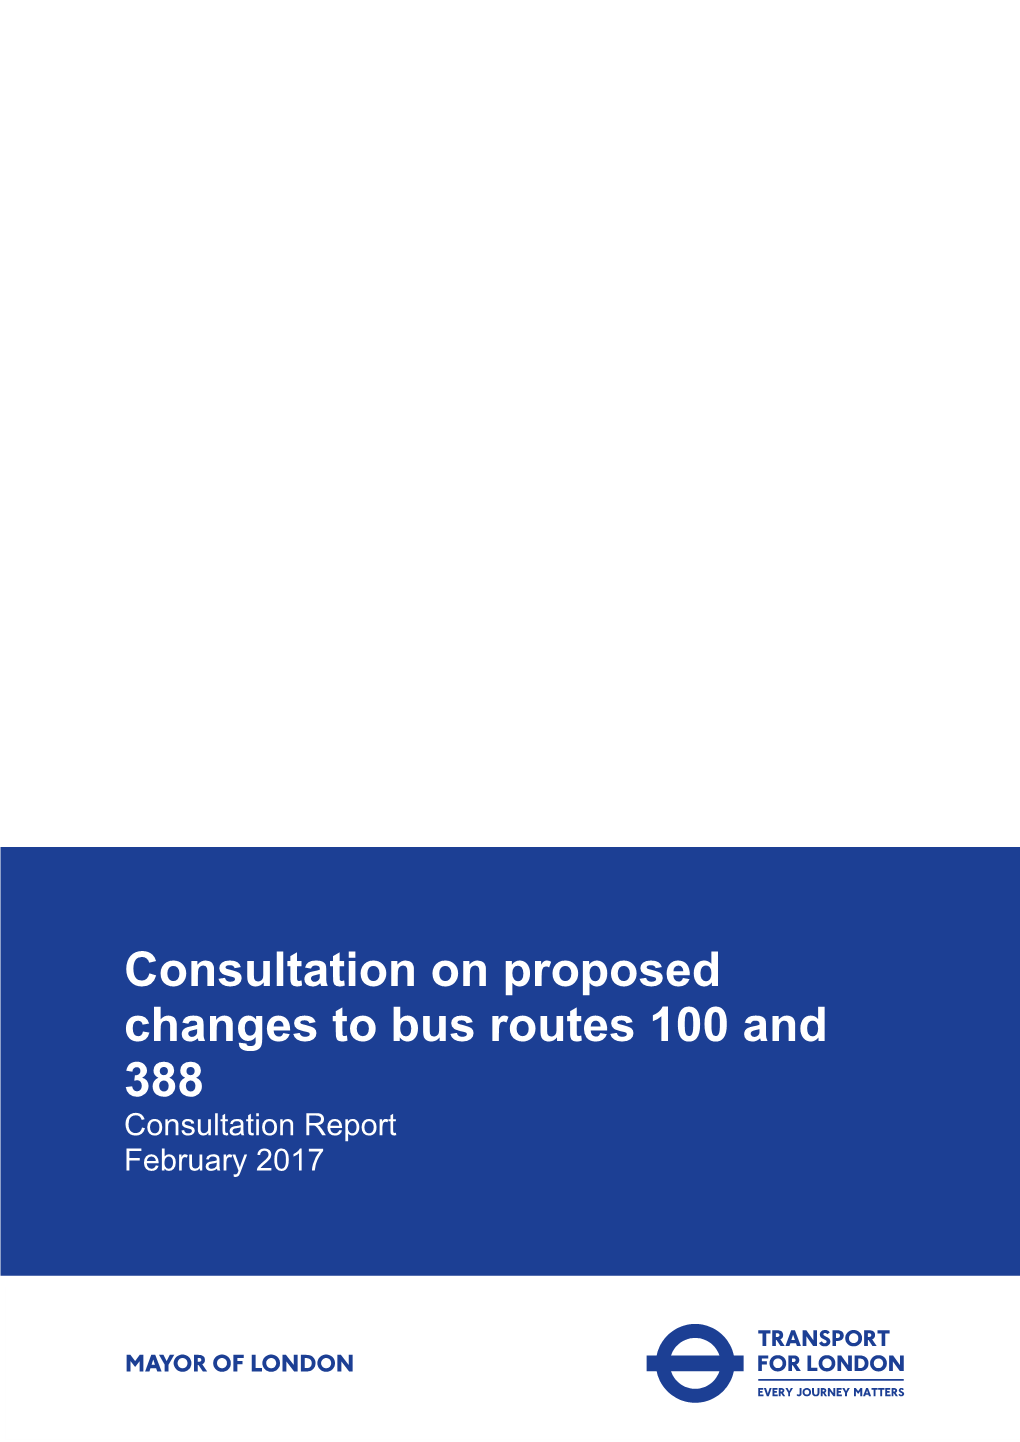 Consultation on Proposed Changes to Bus Routes 100 and 388 Consultation Report February 2017